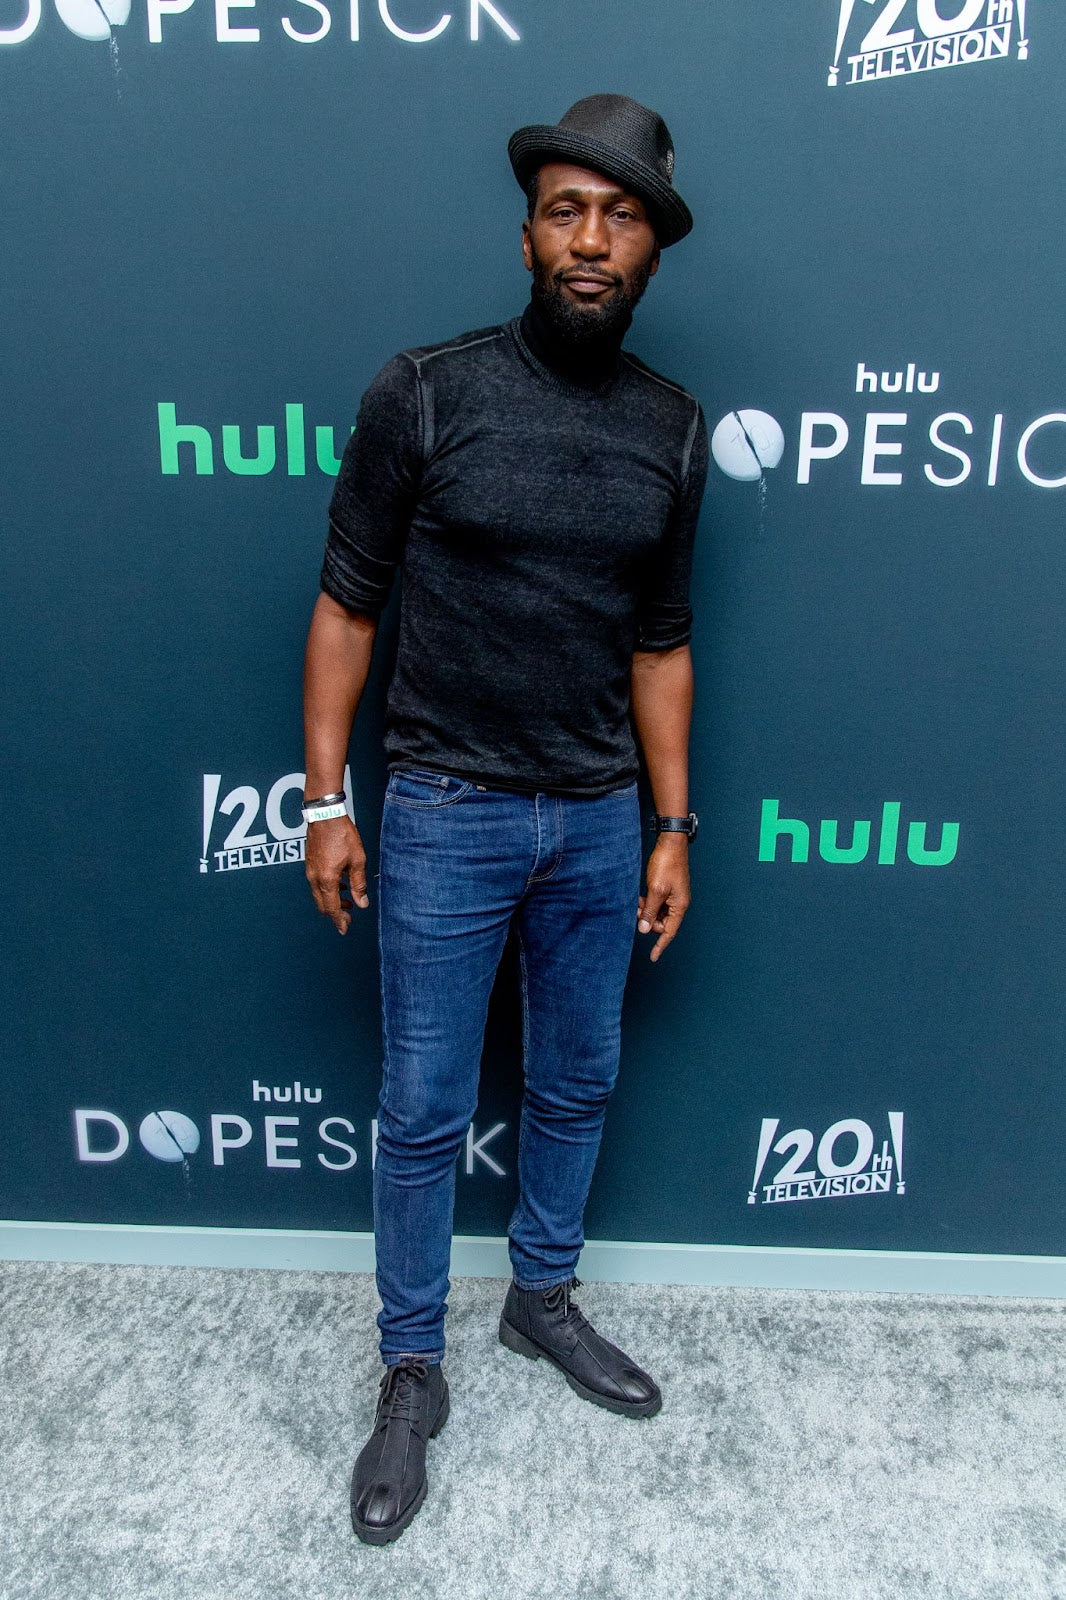 A guest wore a black men’s trilby hat with matching black sweater, watch, and boots at a Hulu premiere in New York City (Roy Rochlin/WireImage).